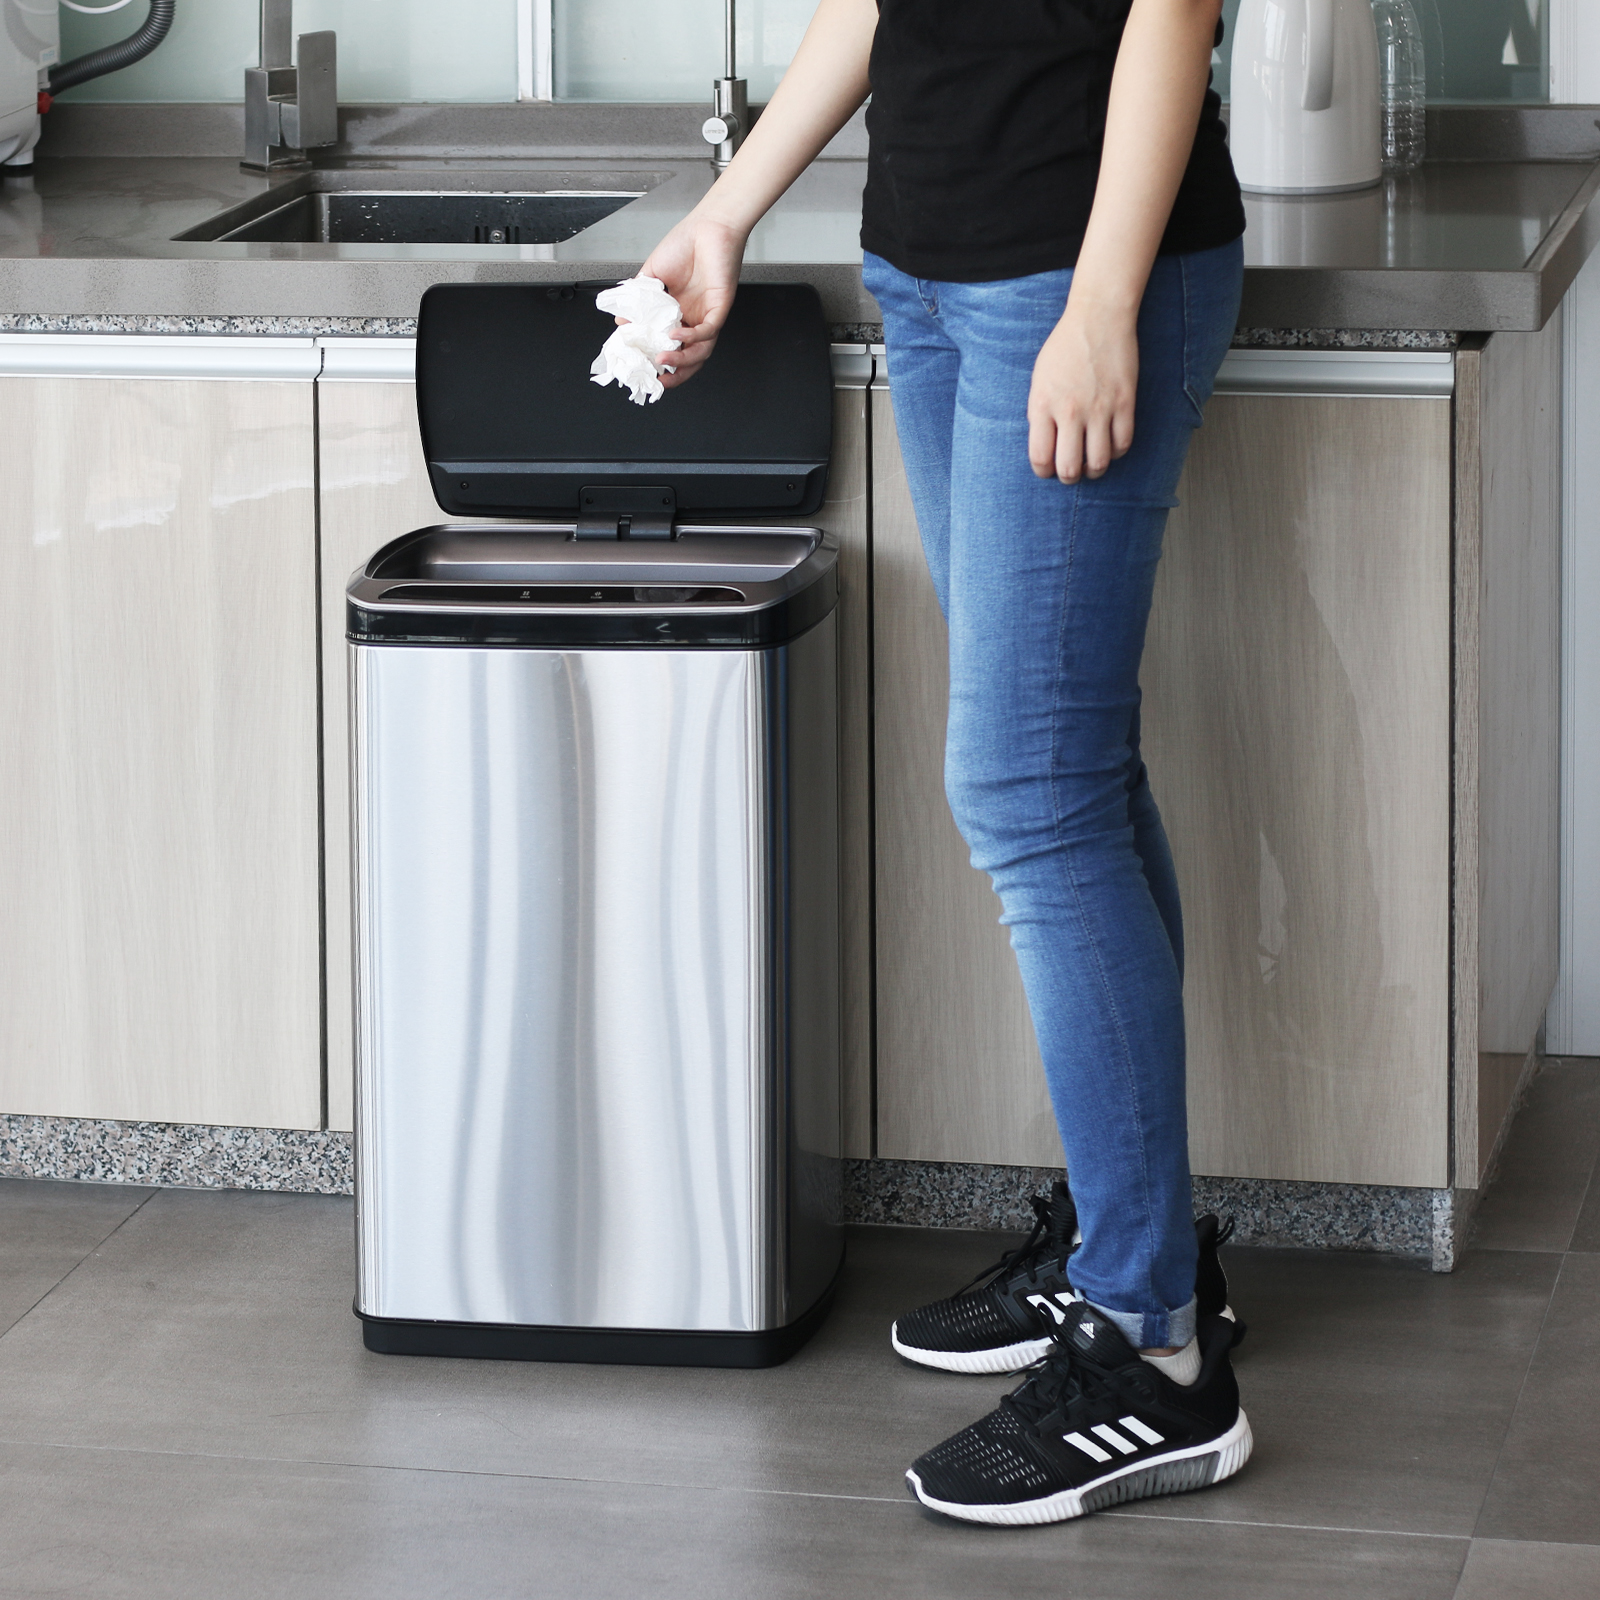 50L automatic bag change trash can 13 gallons trash can sensor stainless steel automatic sensing trash can